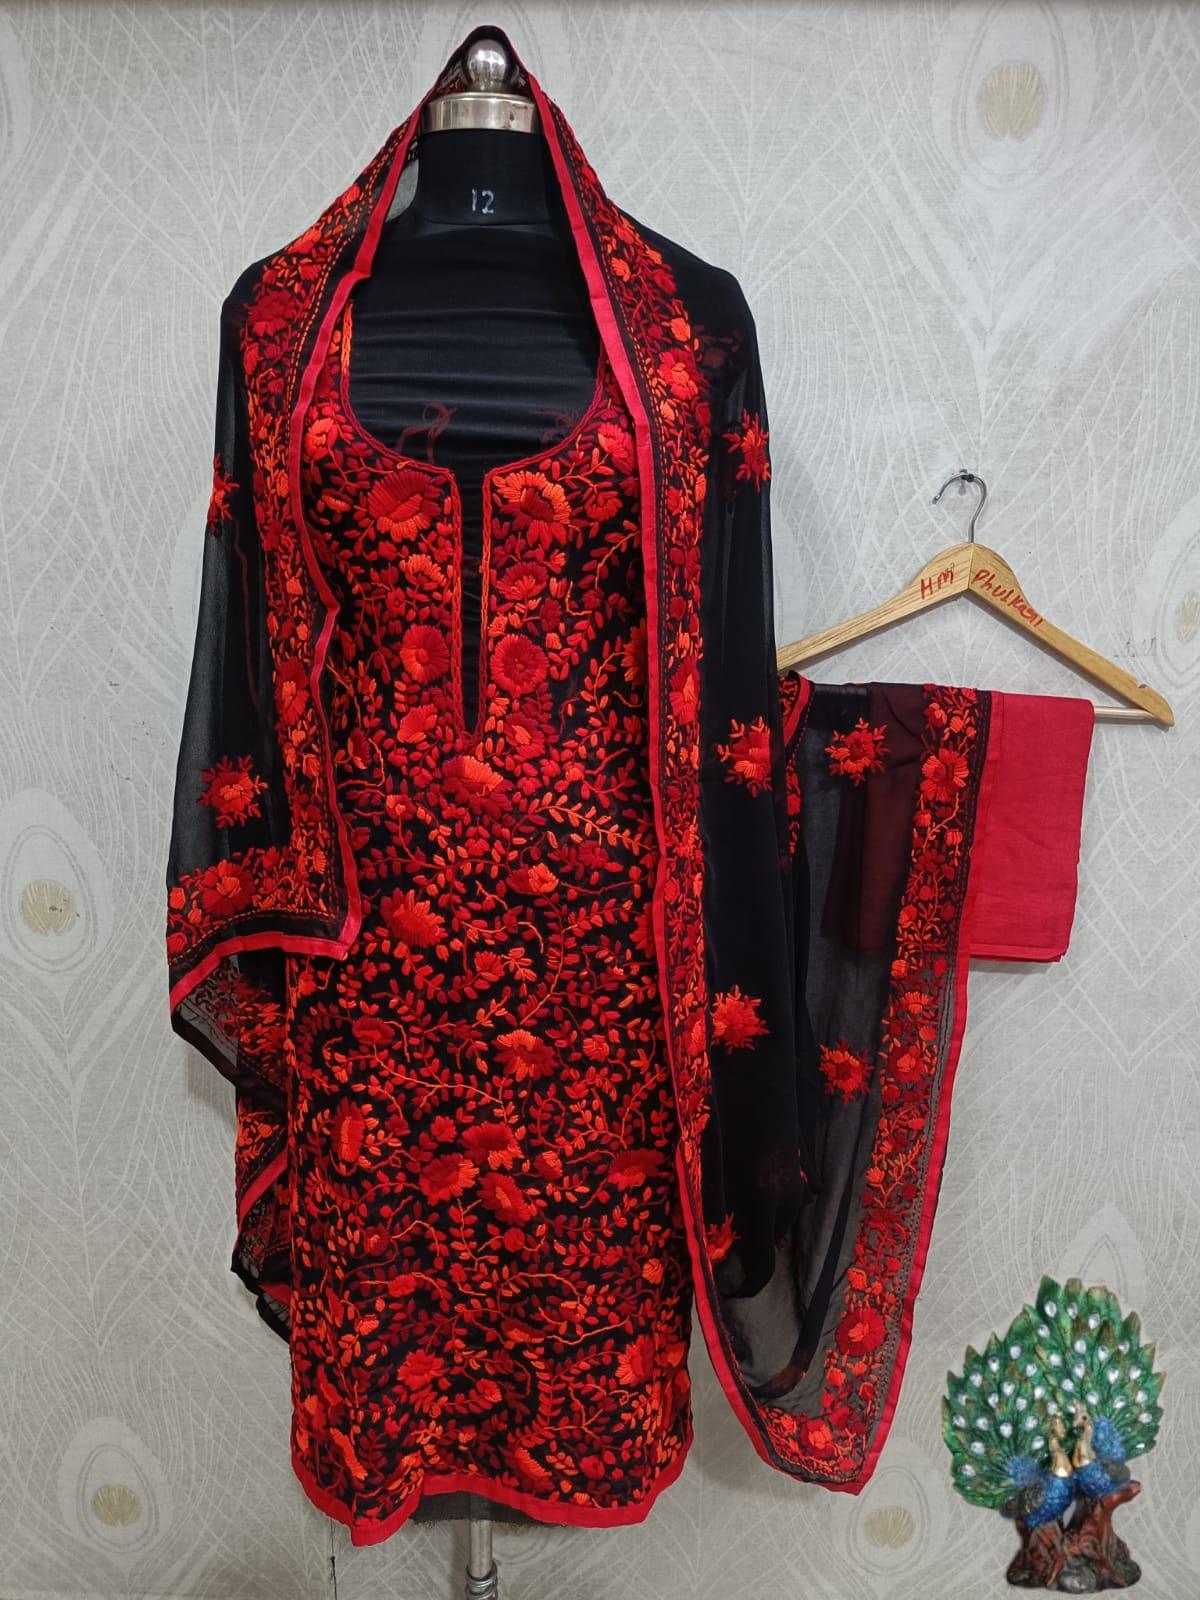 Red & Black Special Georgette Phulkari Suit with Beautiful Embroidery Shopping Online - Inayakhan Shop 